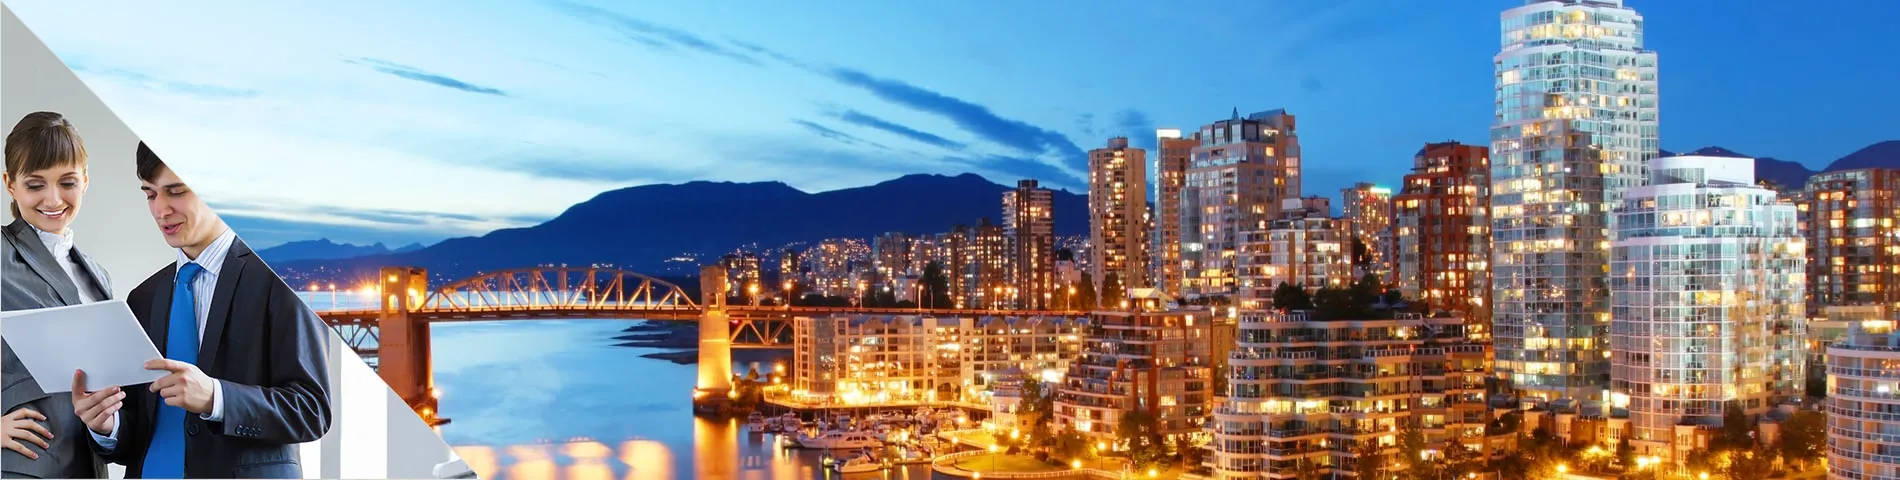 Vancouver - Business One-to-One